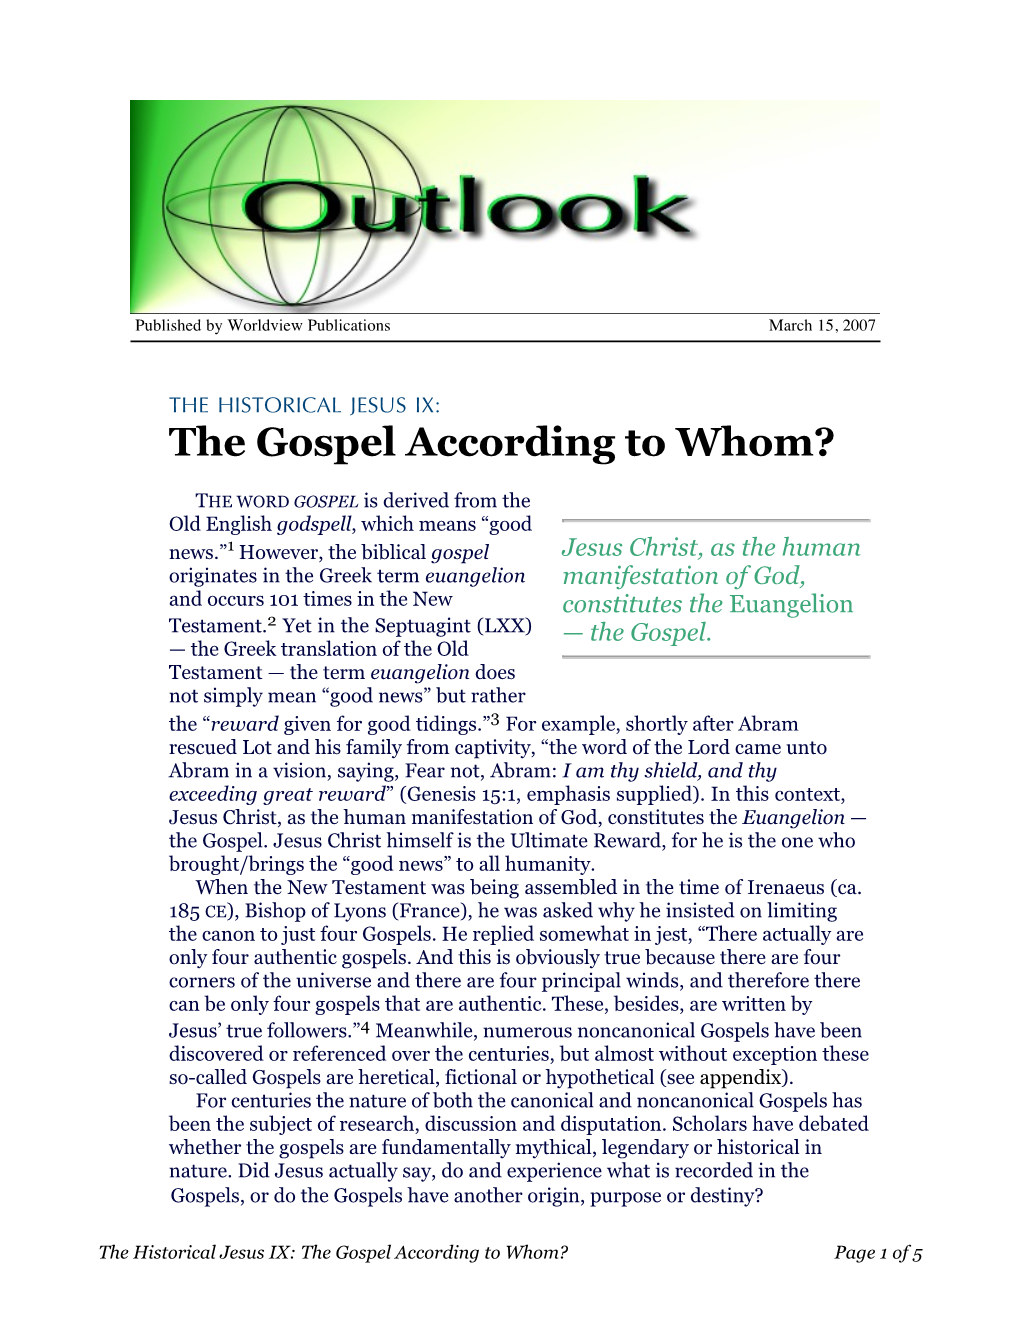 The Gospel According to Whom?